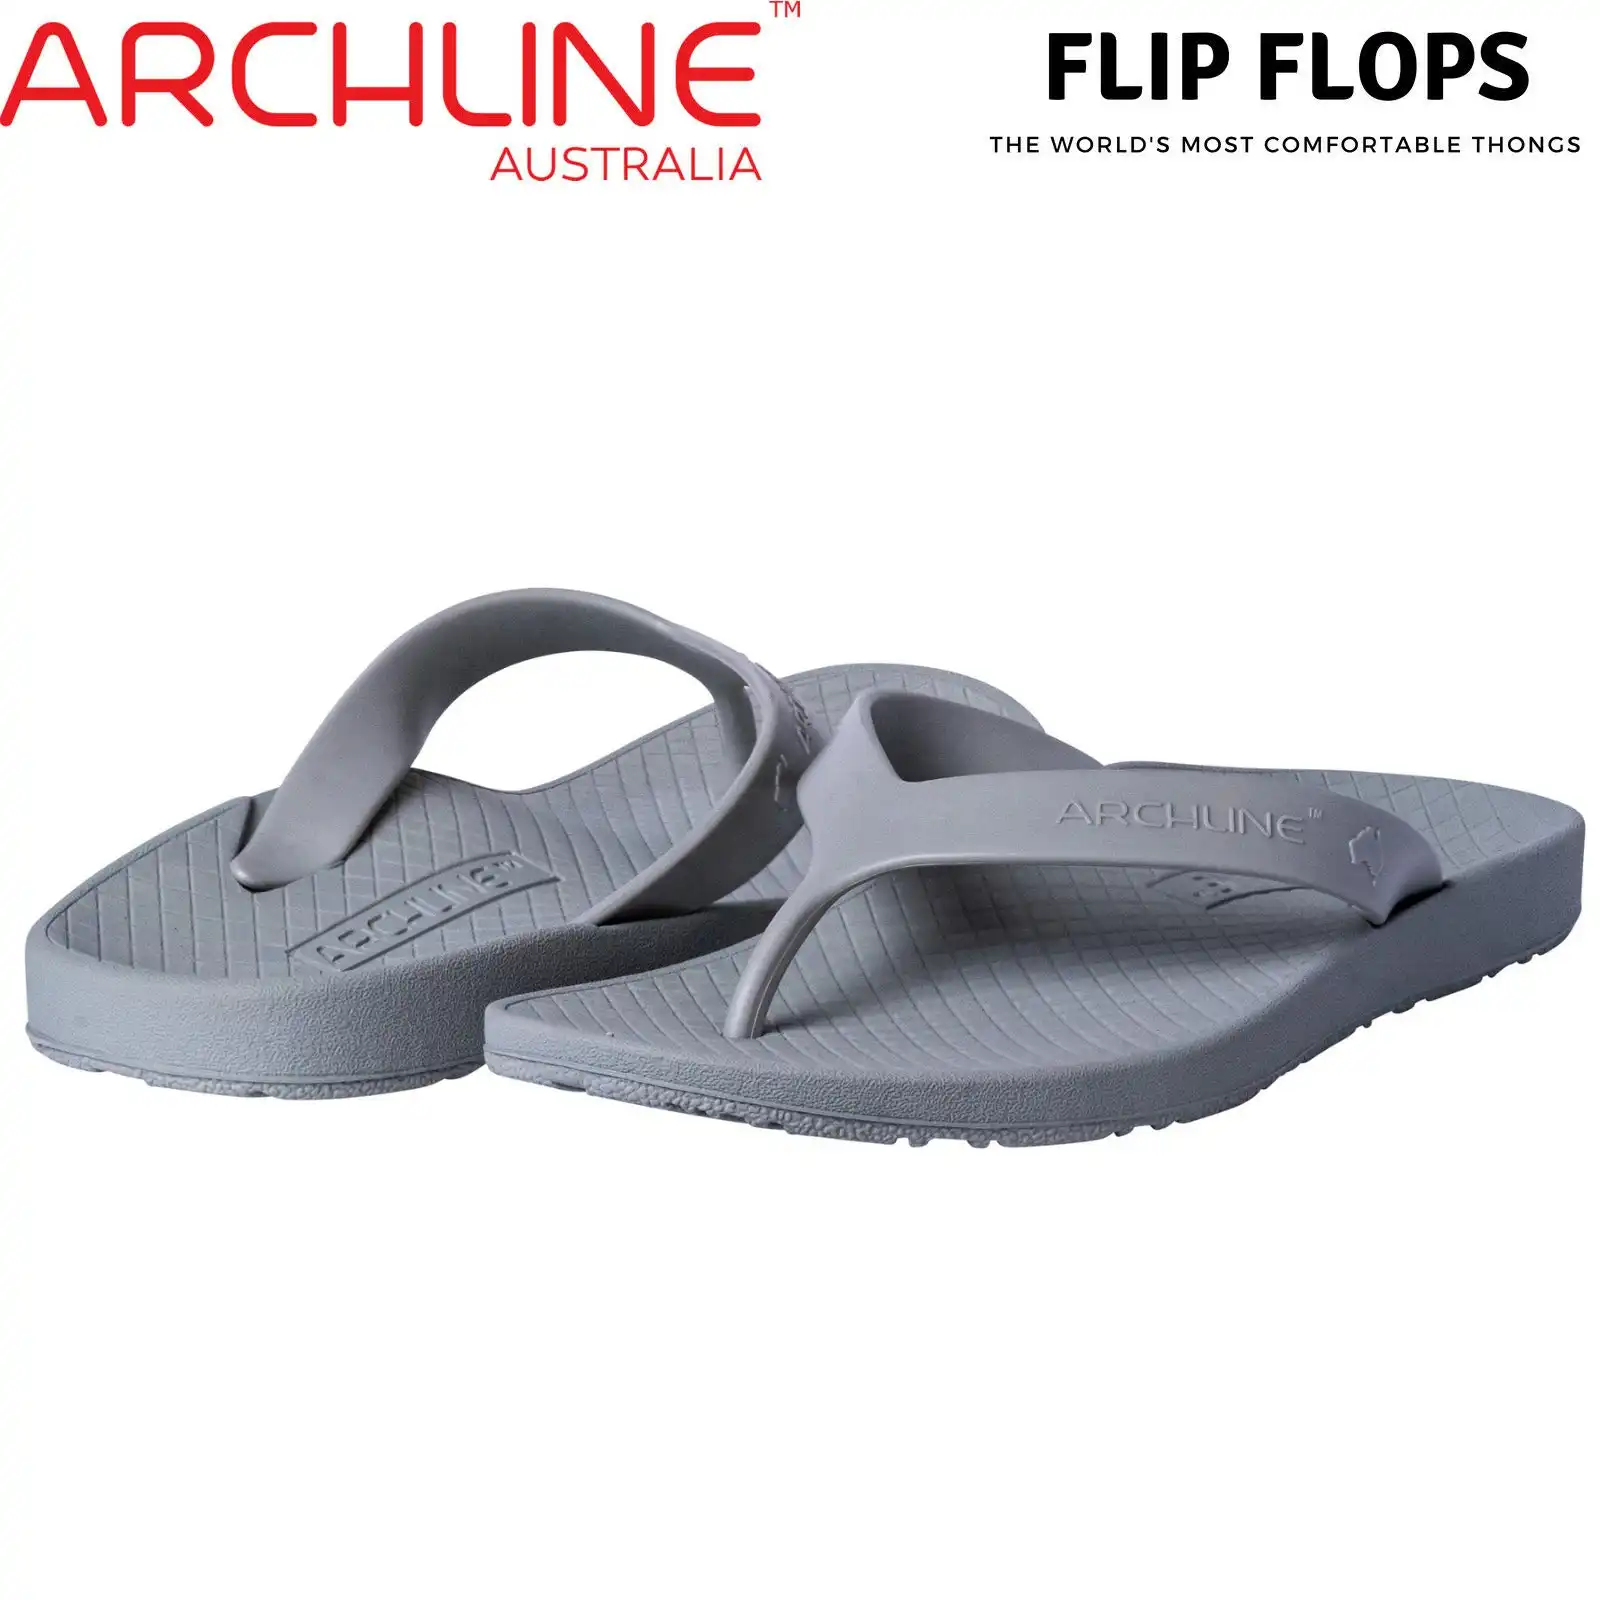 Archline Orthotic Thongs Arch Support Shoes Medical Footwear Flip Flops - Grey